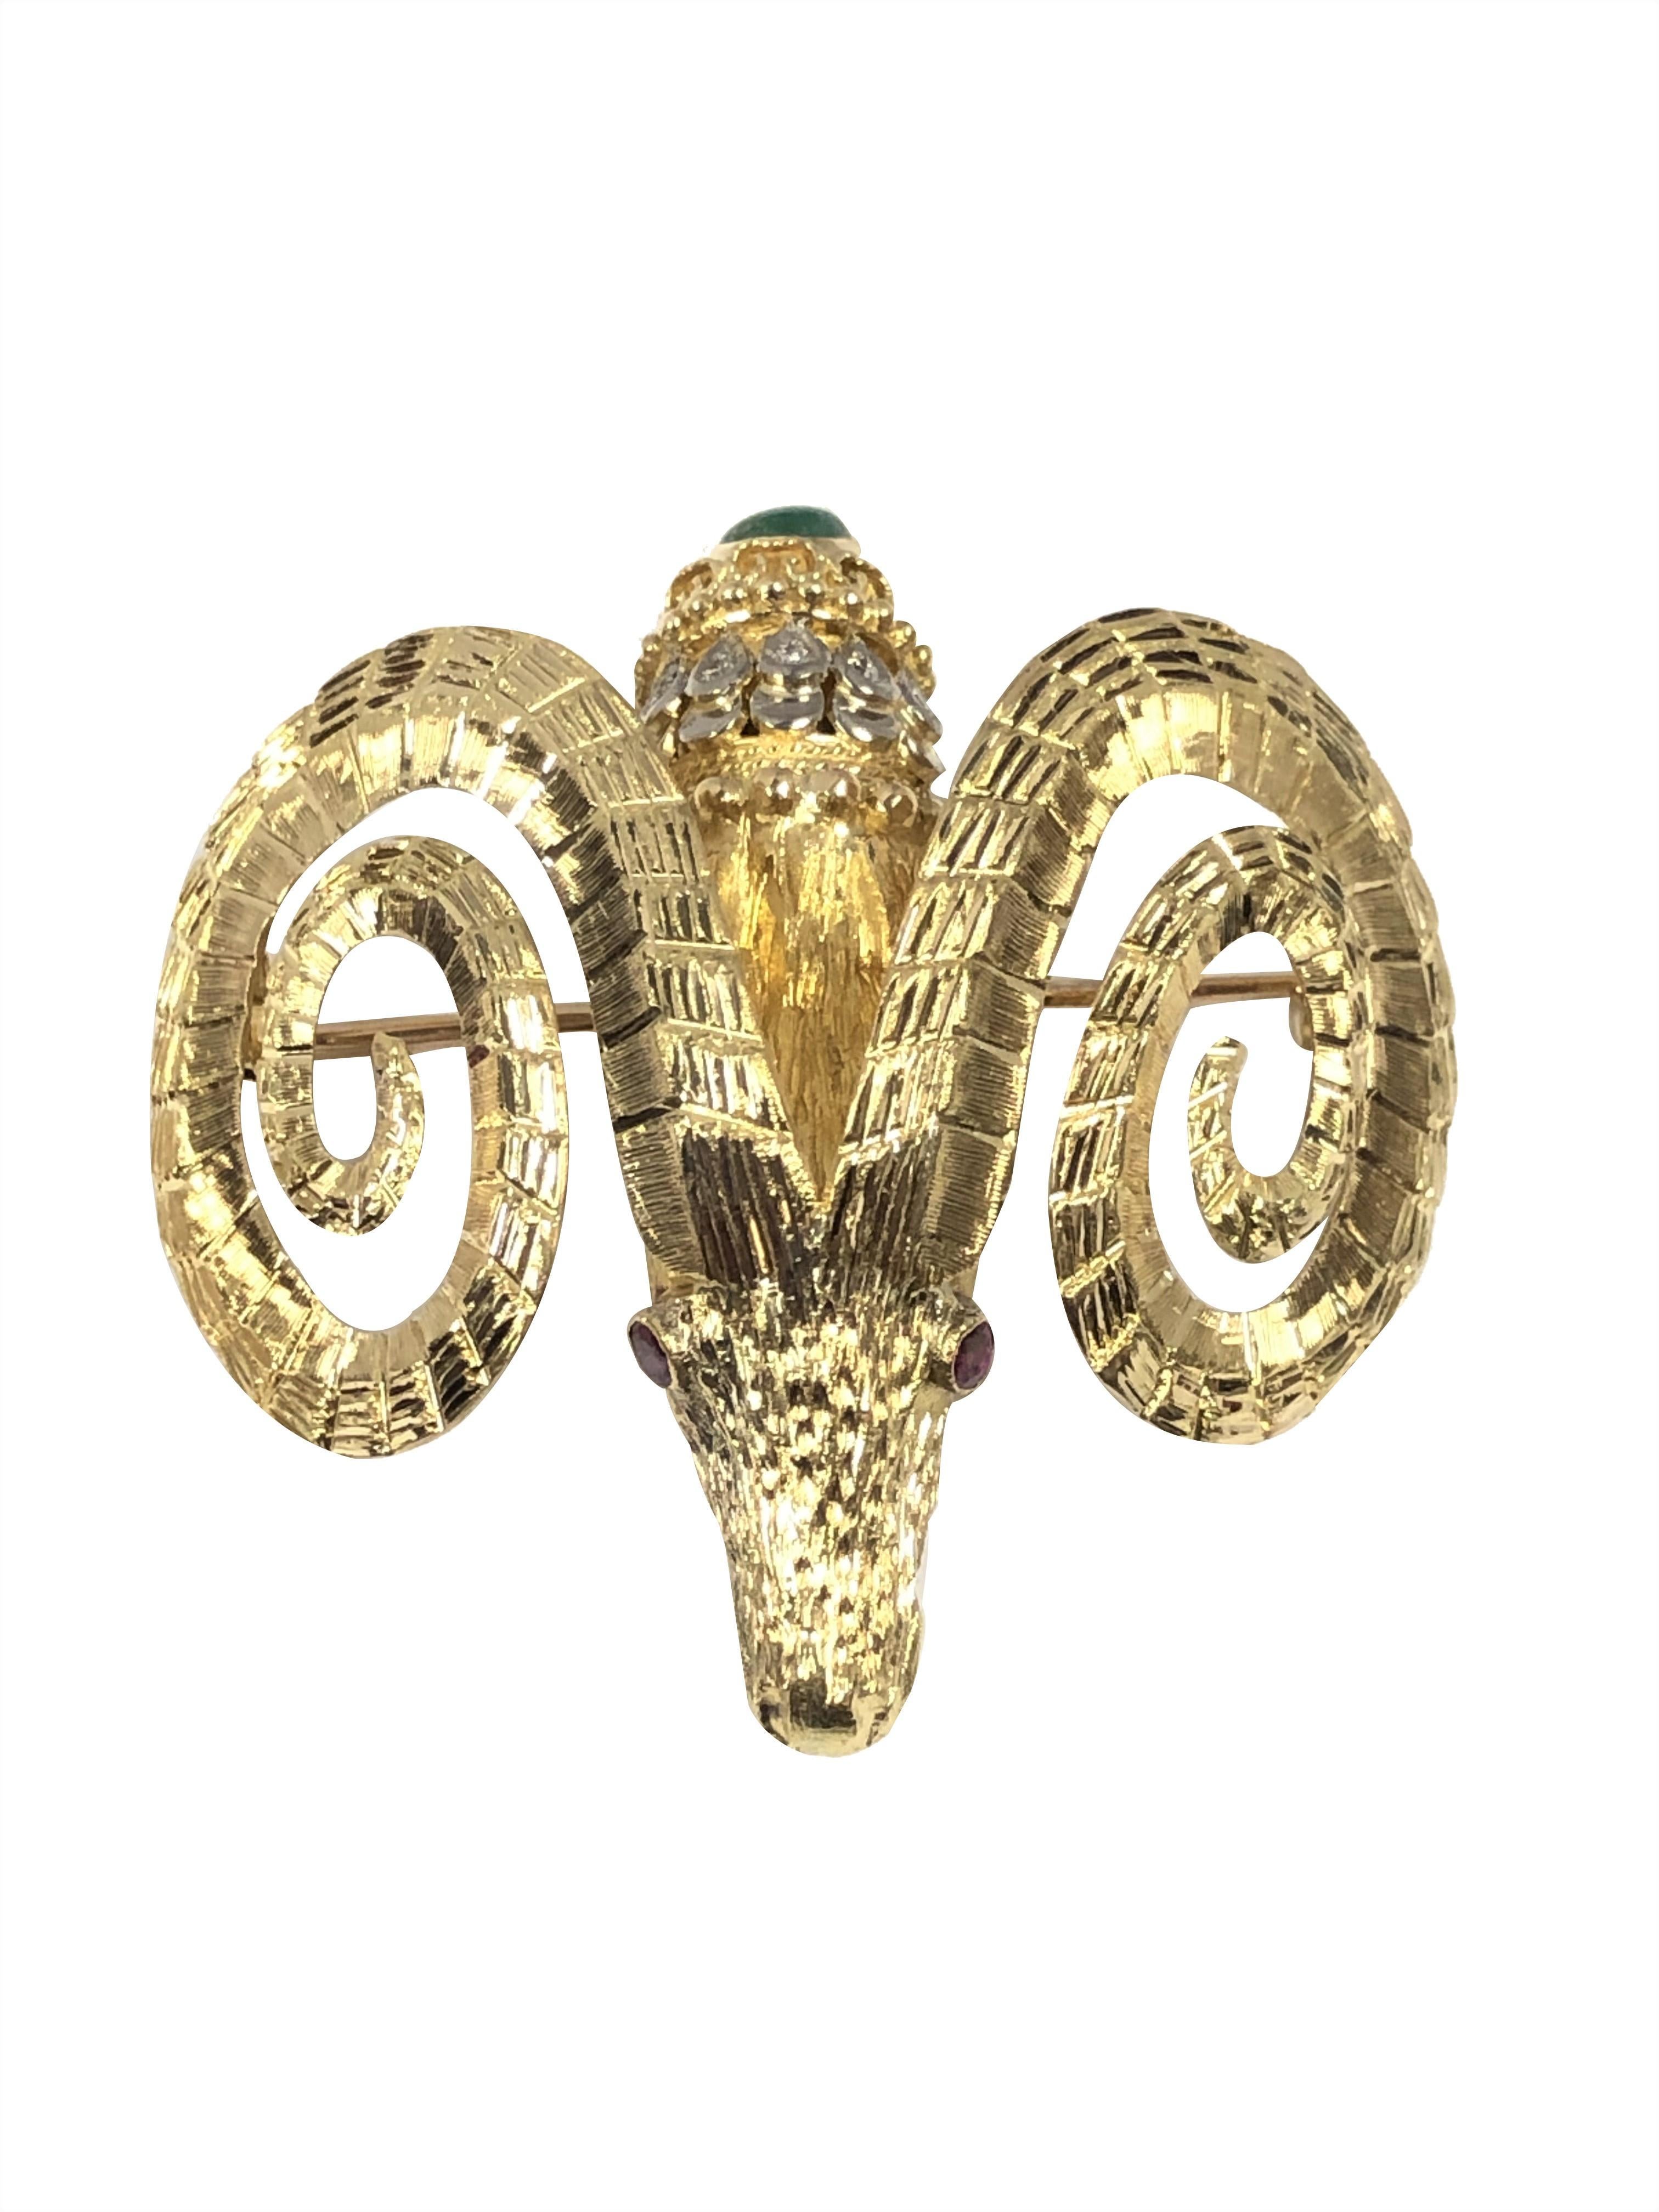 Circa 1980 Ilias Lalaounis Rams Head Brooch, measuring 1 7/8 X 1 7/8 inches and weighing 30.4 Grams, finely detailed with Gold chasing and texturing a famous Lalaounis trademark and set with Diamonds, a Cabochon Emerald and Ruby Eyes. 